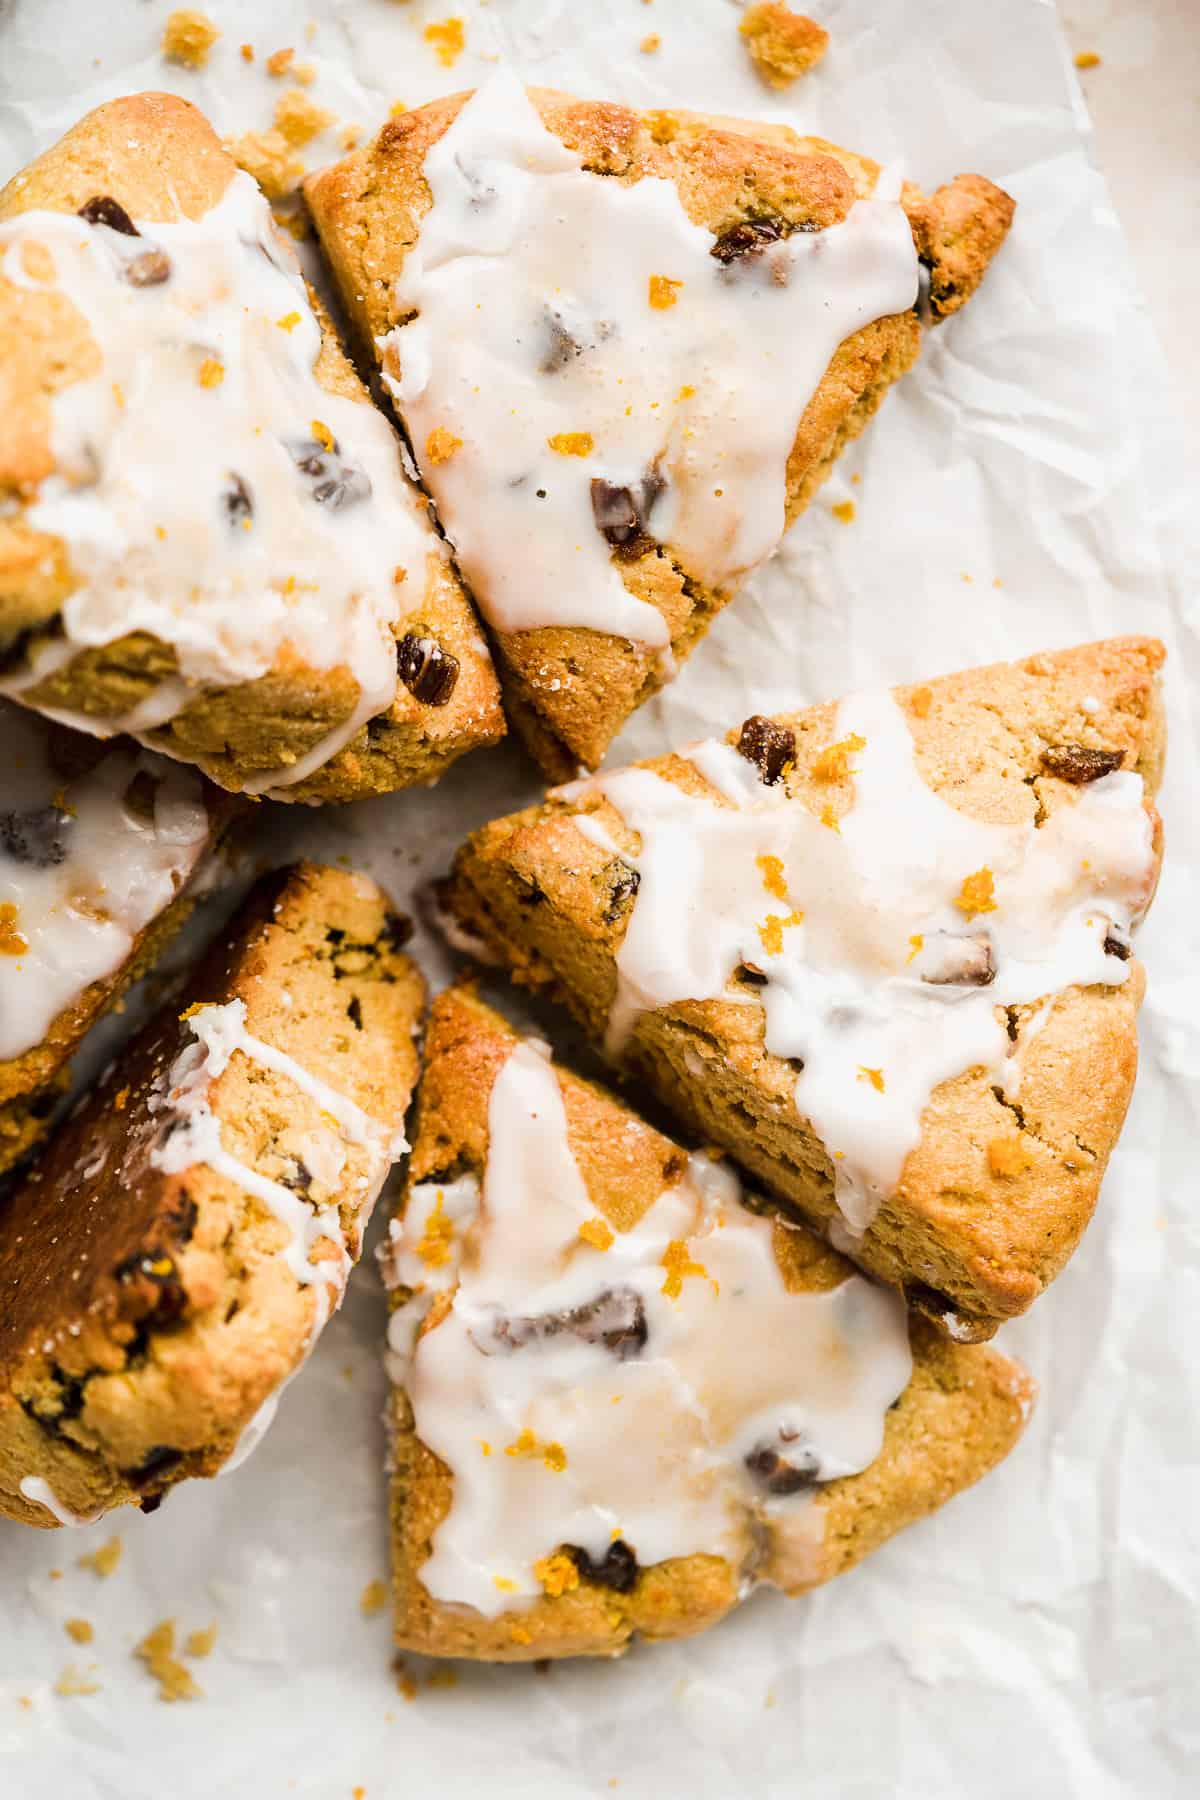 Golden triangular scones with white icing scattered on parchment paper.